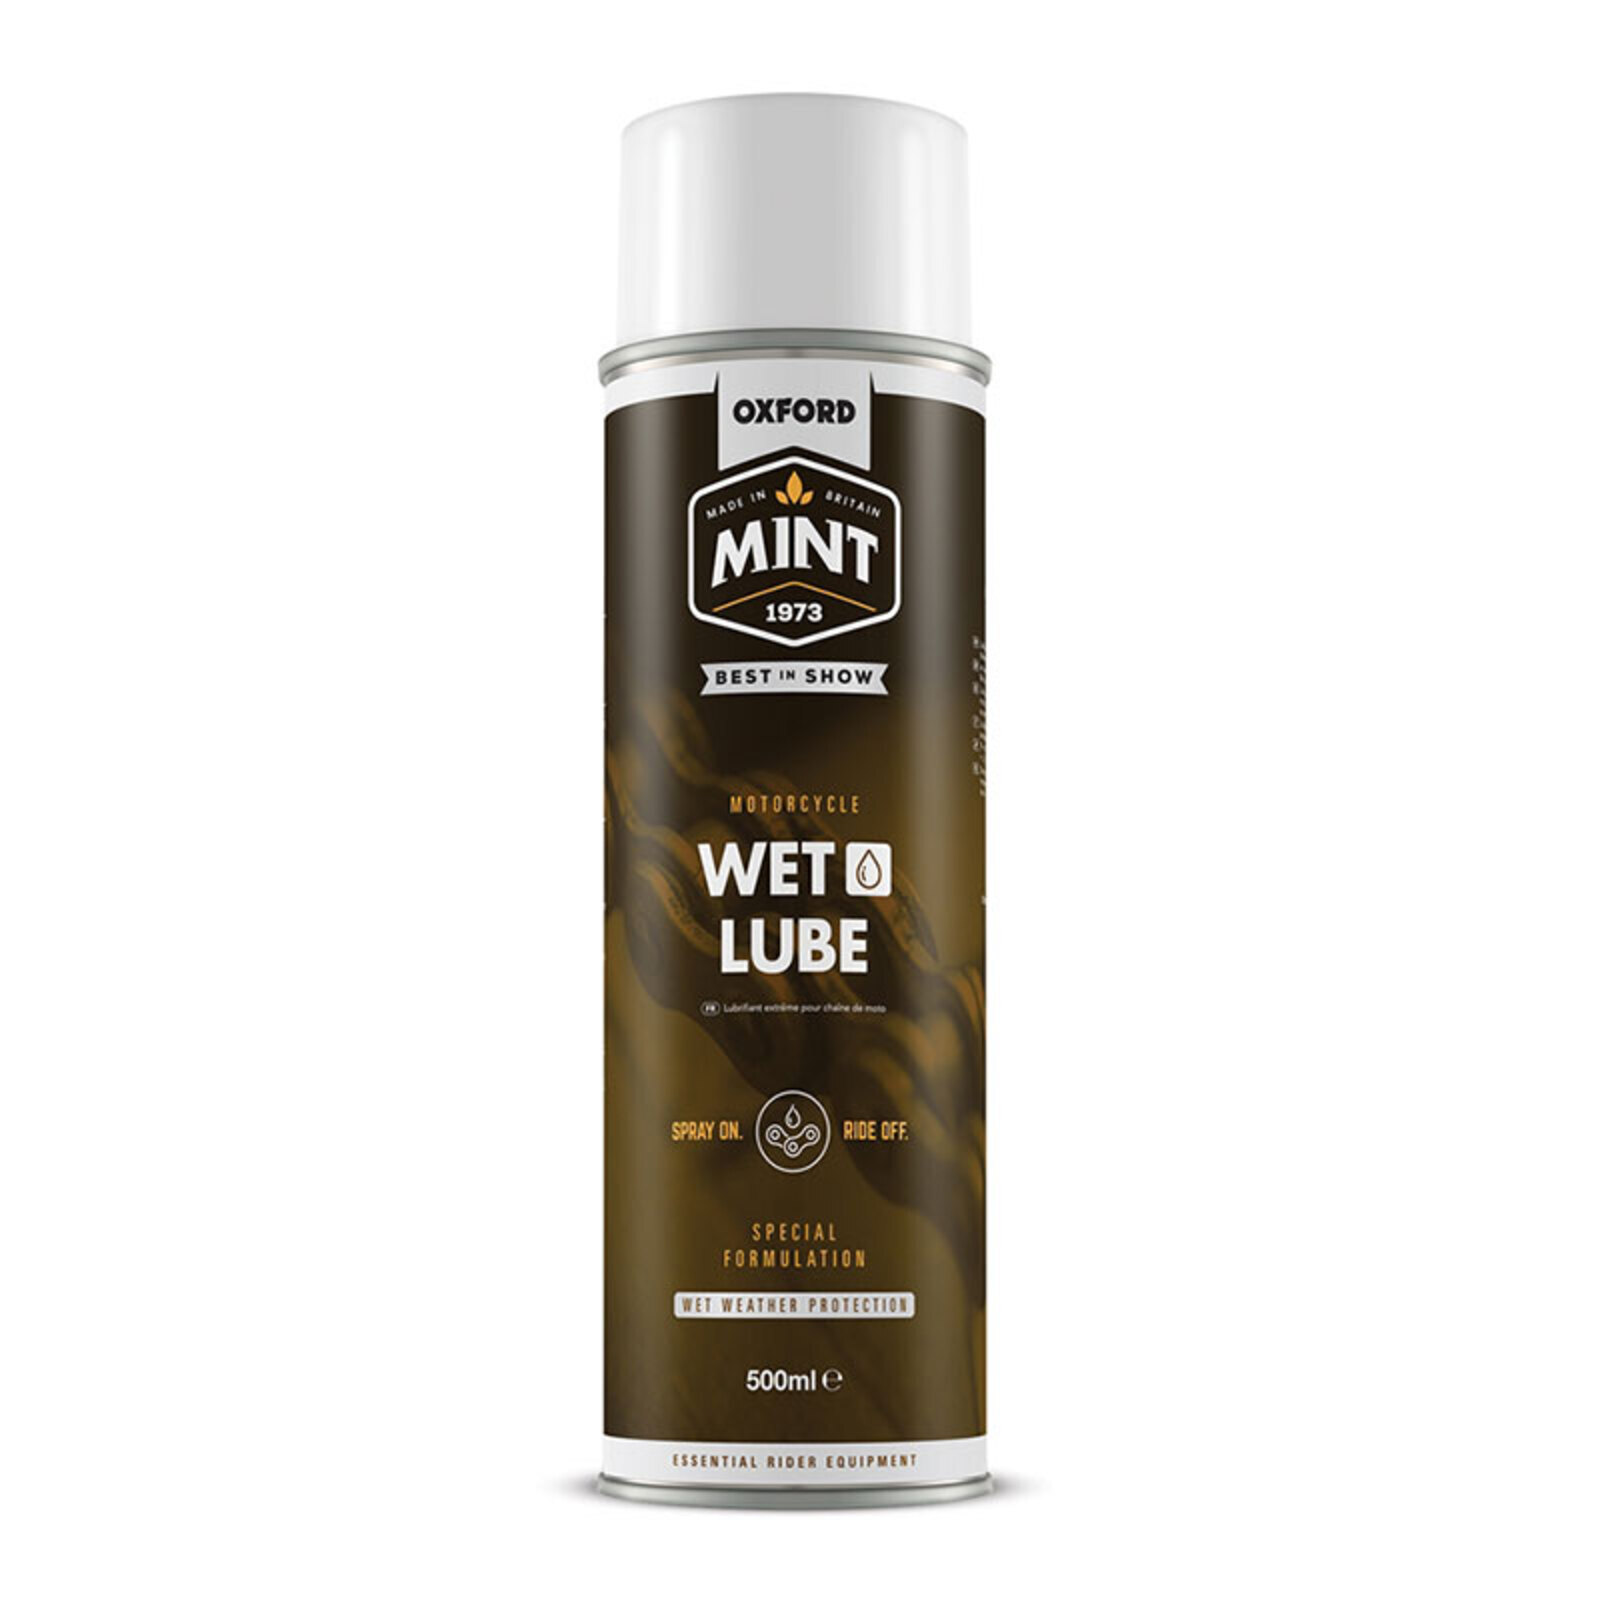 OXFORD MINT WET WEATHER LUBE 500ML